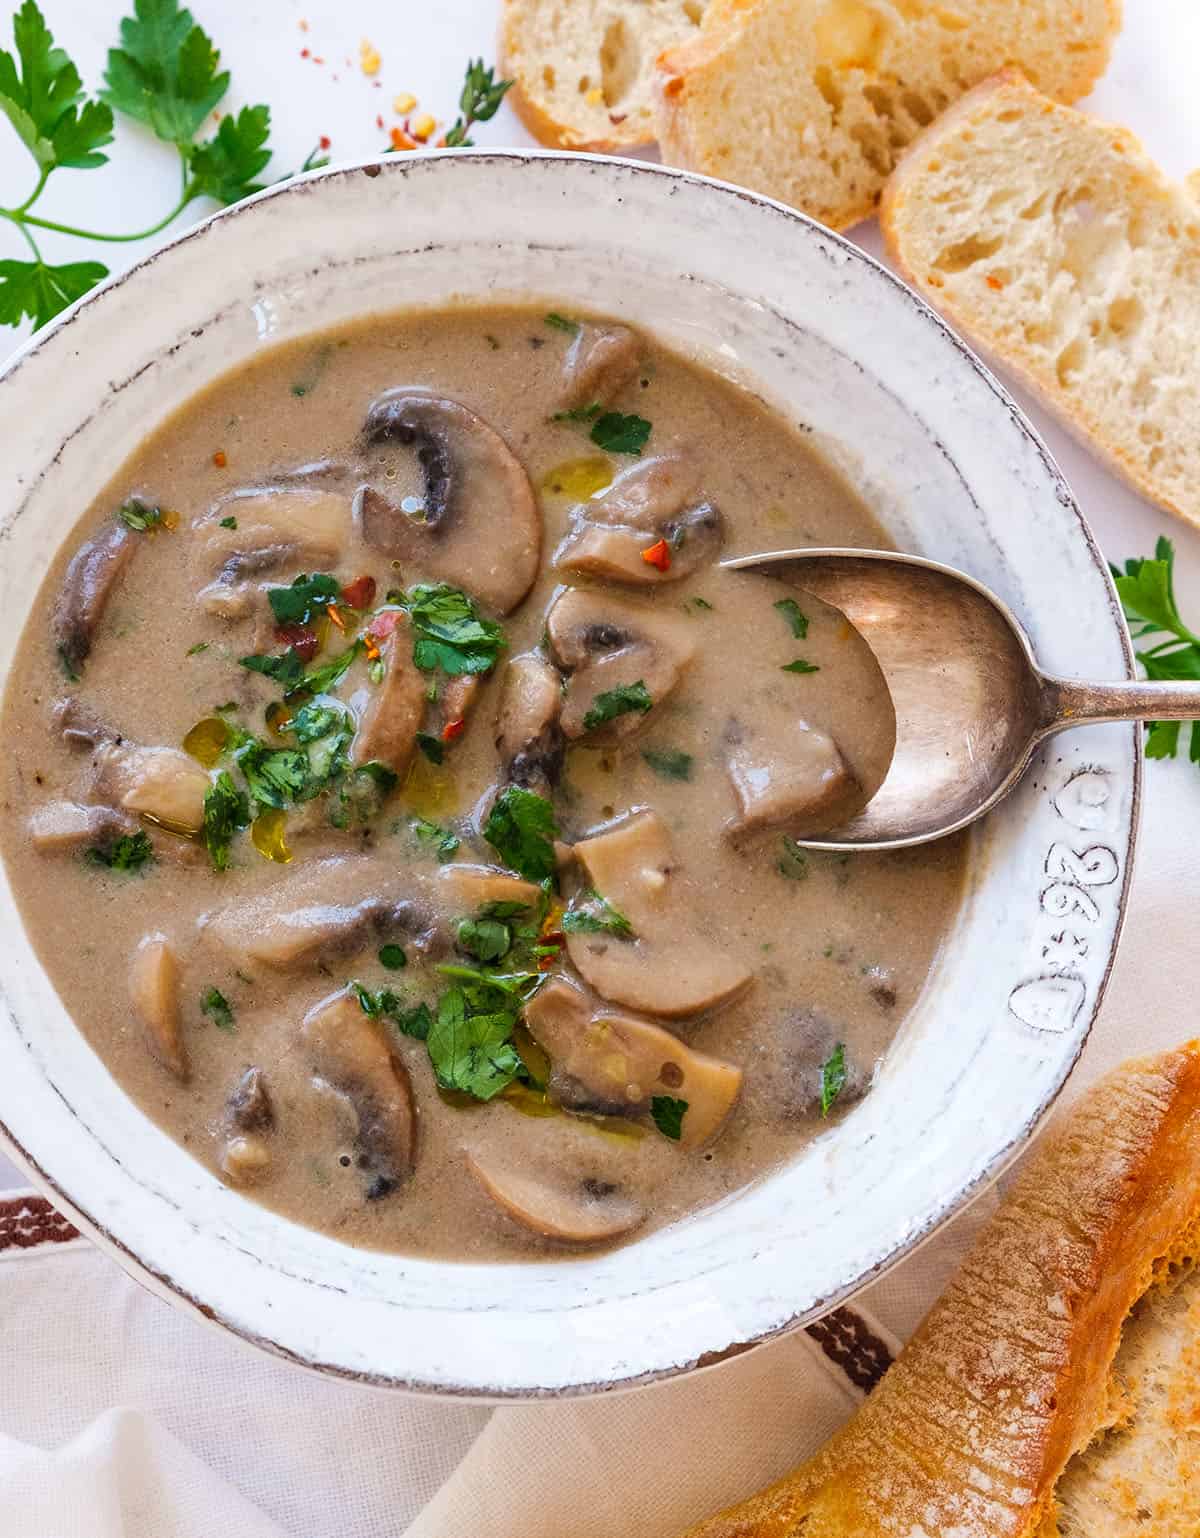 Top view of a white bowl full of creamy vegan mushroom soup served with crusty bread.